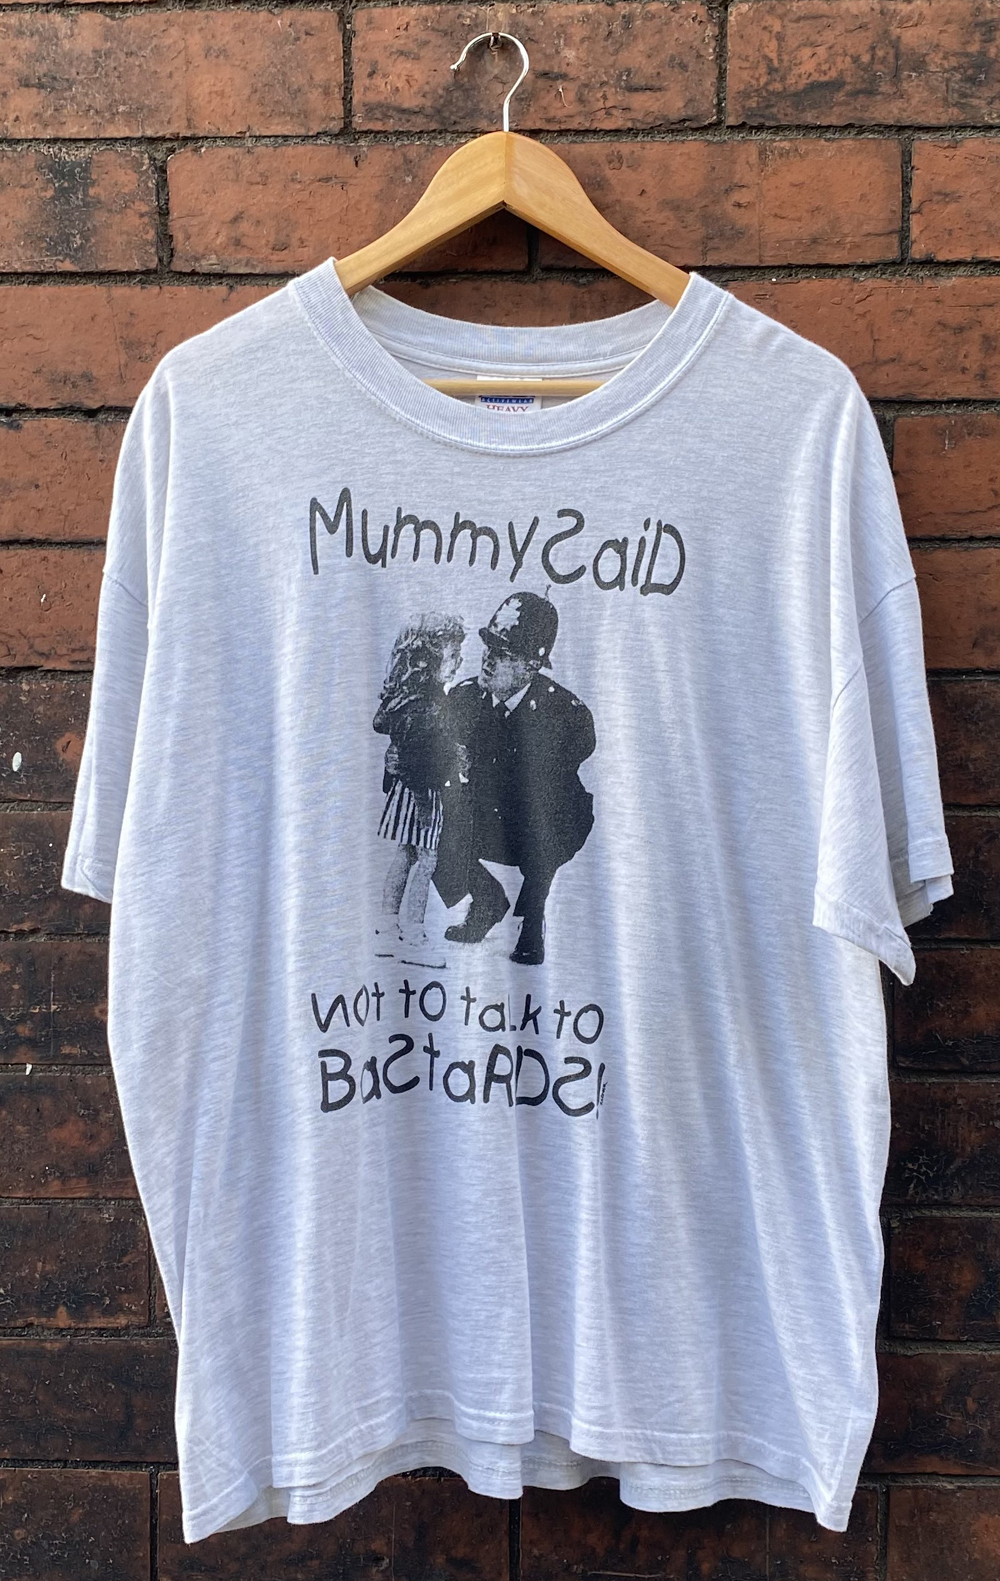 Vintage ACAB Mommy Said Not to talk to Bastards T-Shirt